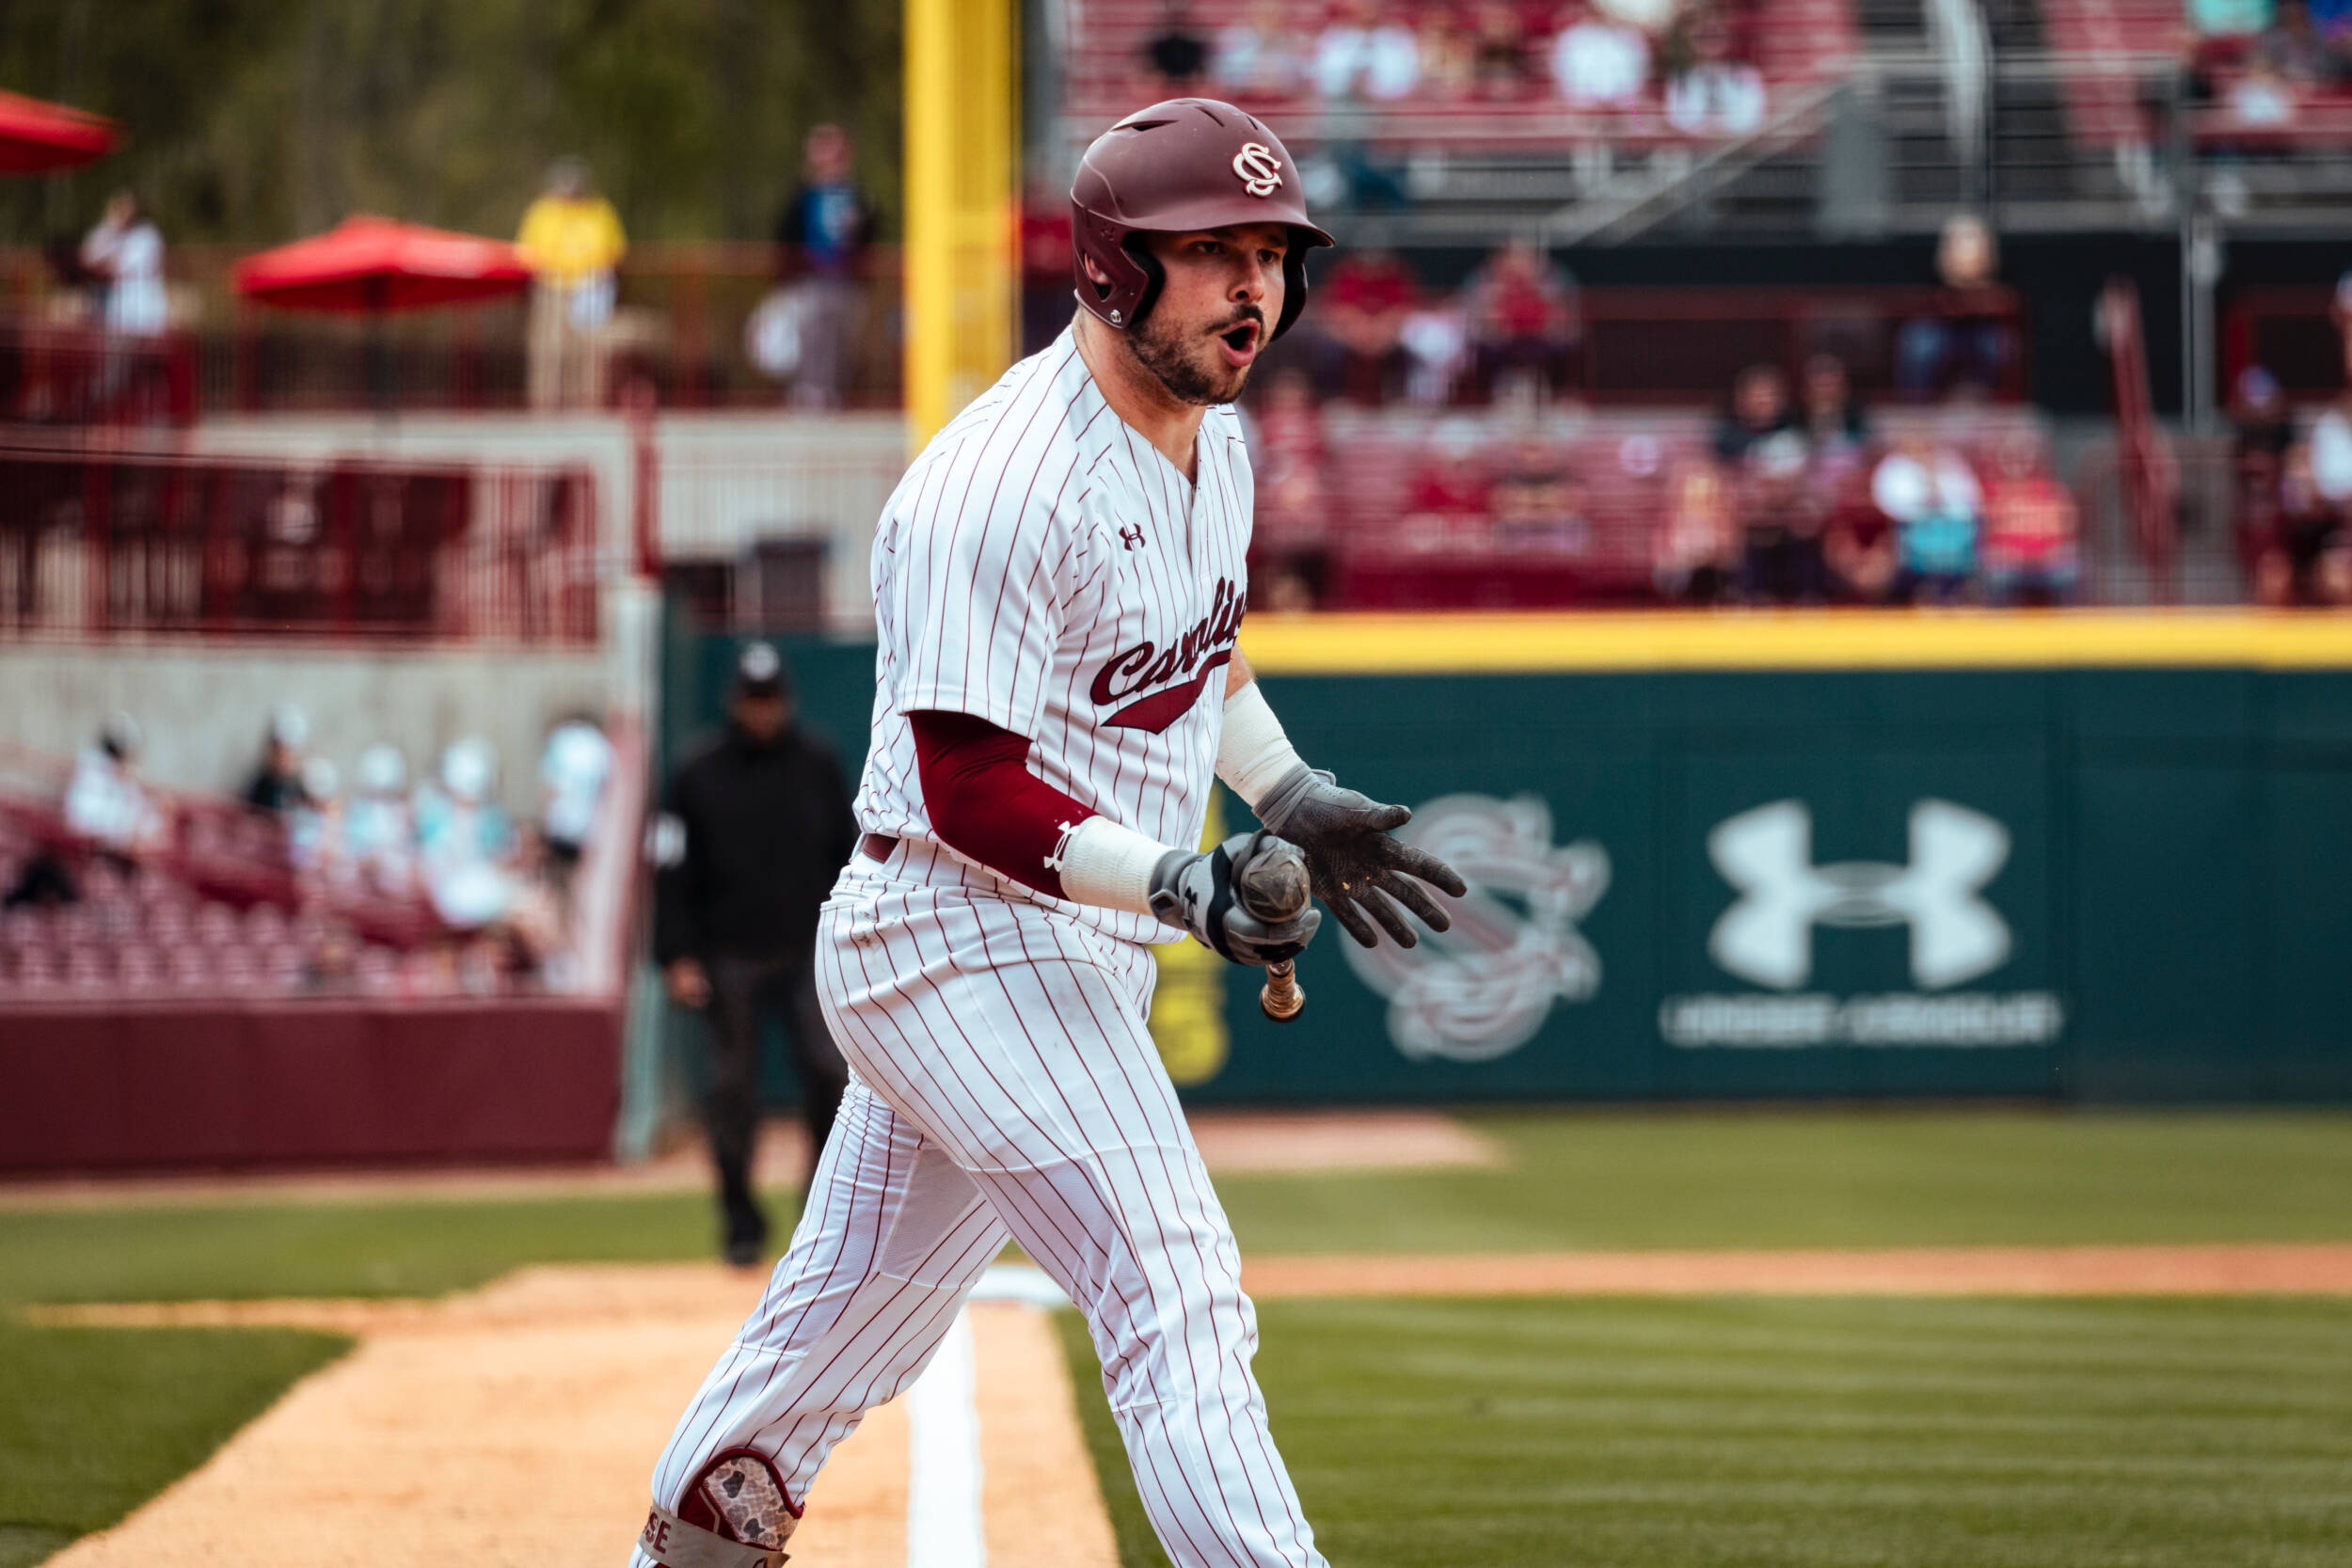 Messina Selected by Colorado in Third Round of the MLB Draft